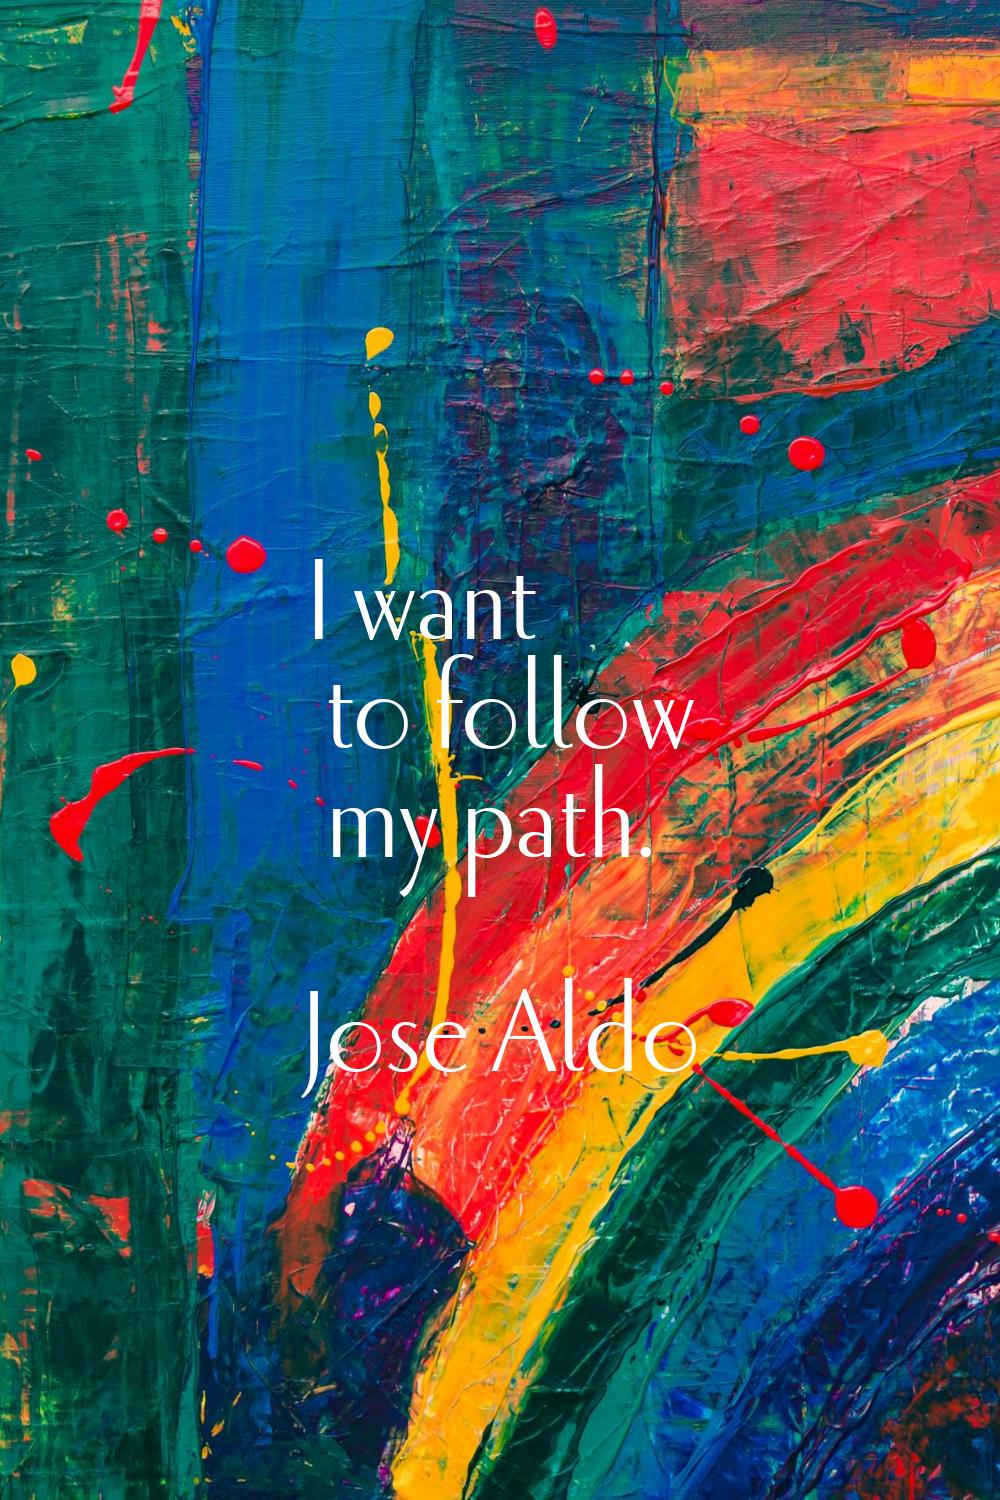 I want to follow my path.